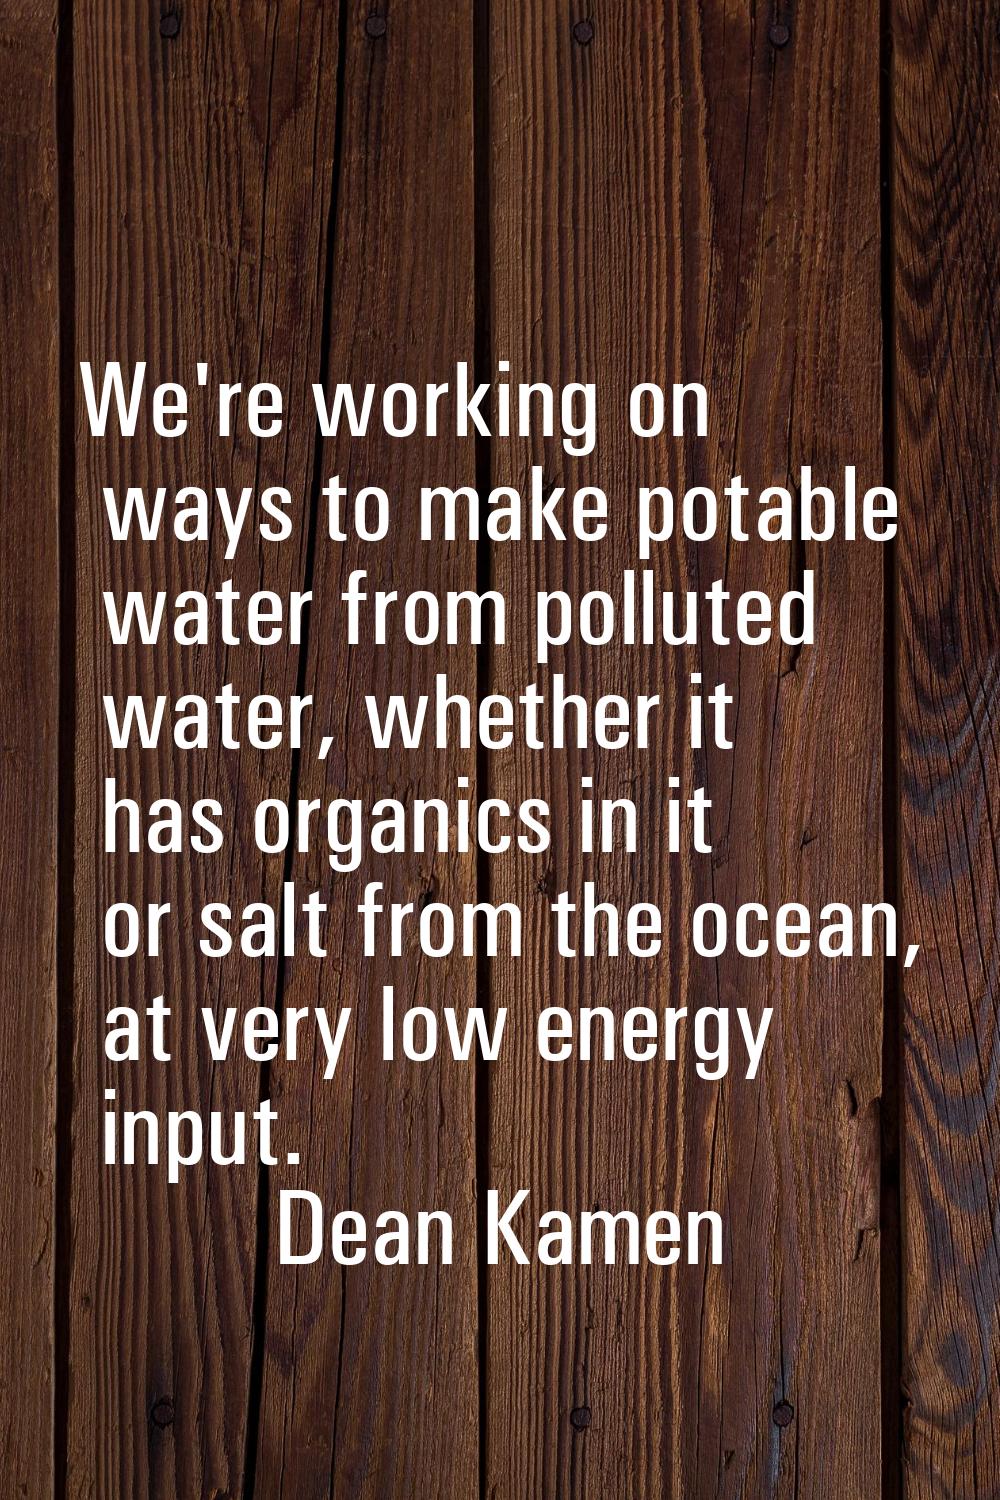 We're working on ways to make potable water from polluted water, whether it has organics in it or s